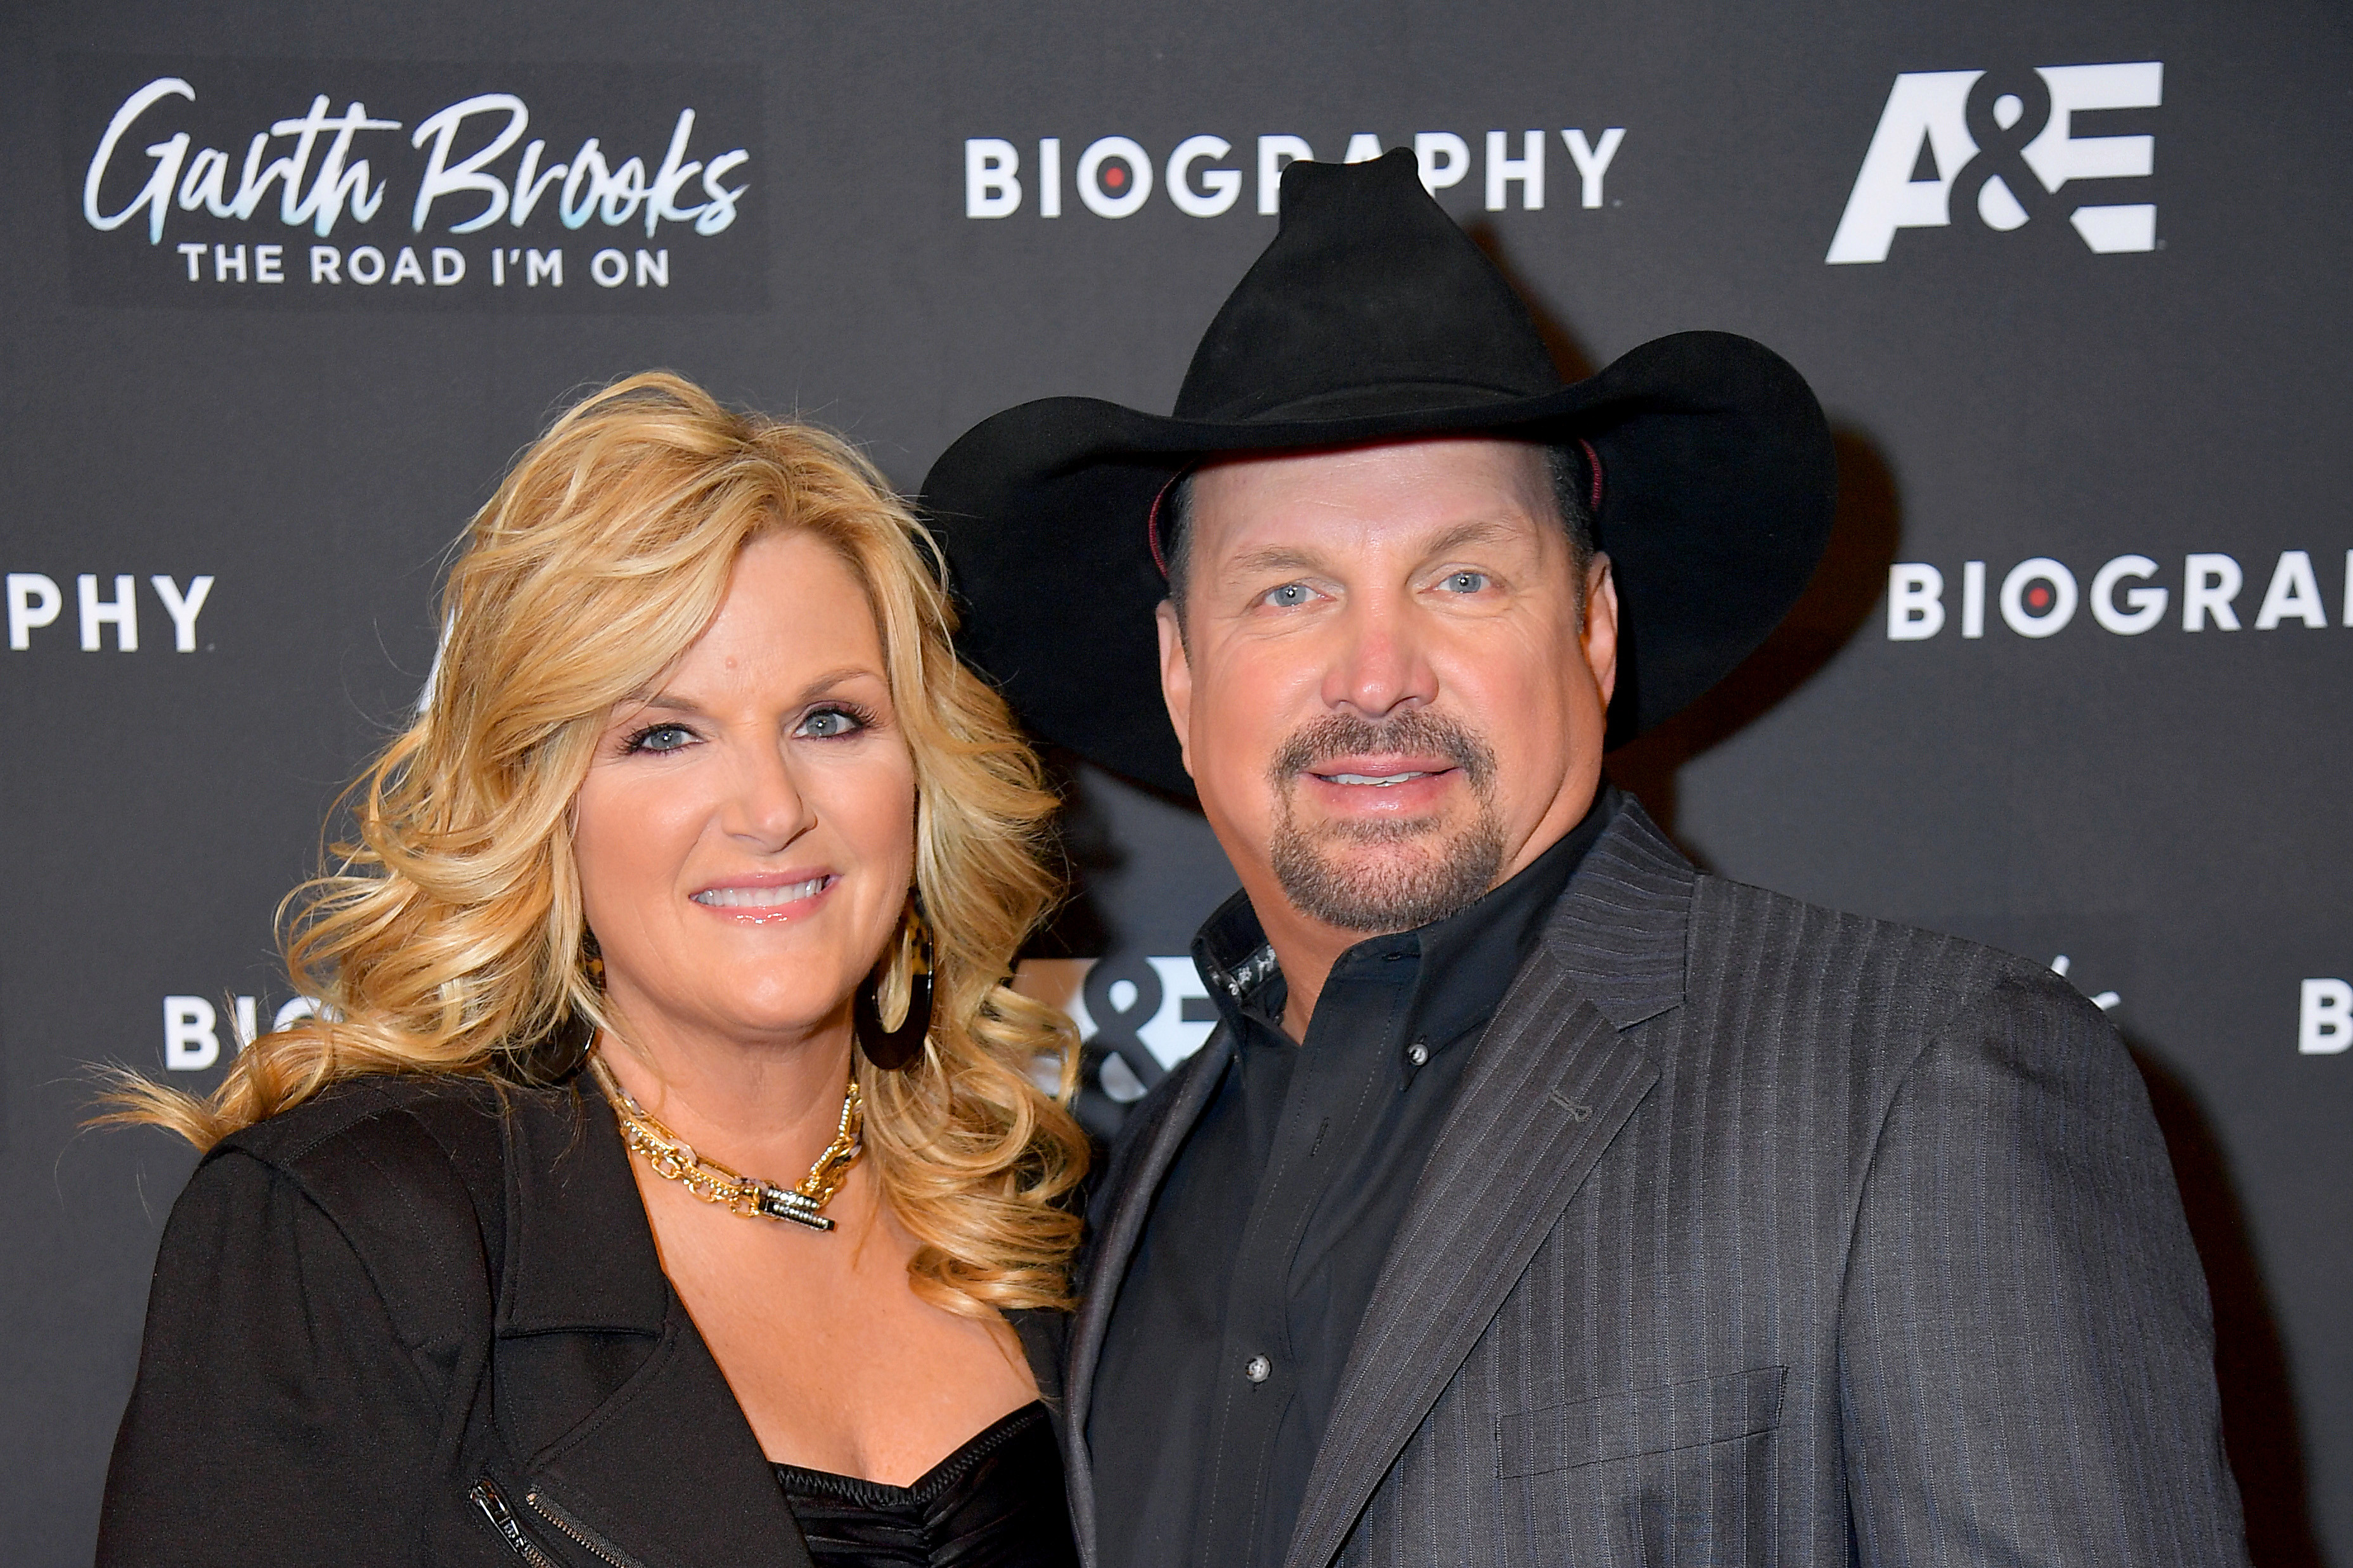 Country singer Trisha Yearwood, 56, contracts Covid-19 as husband Garth Brooks says ‘we’ll ride through this’